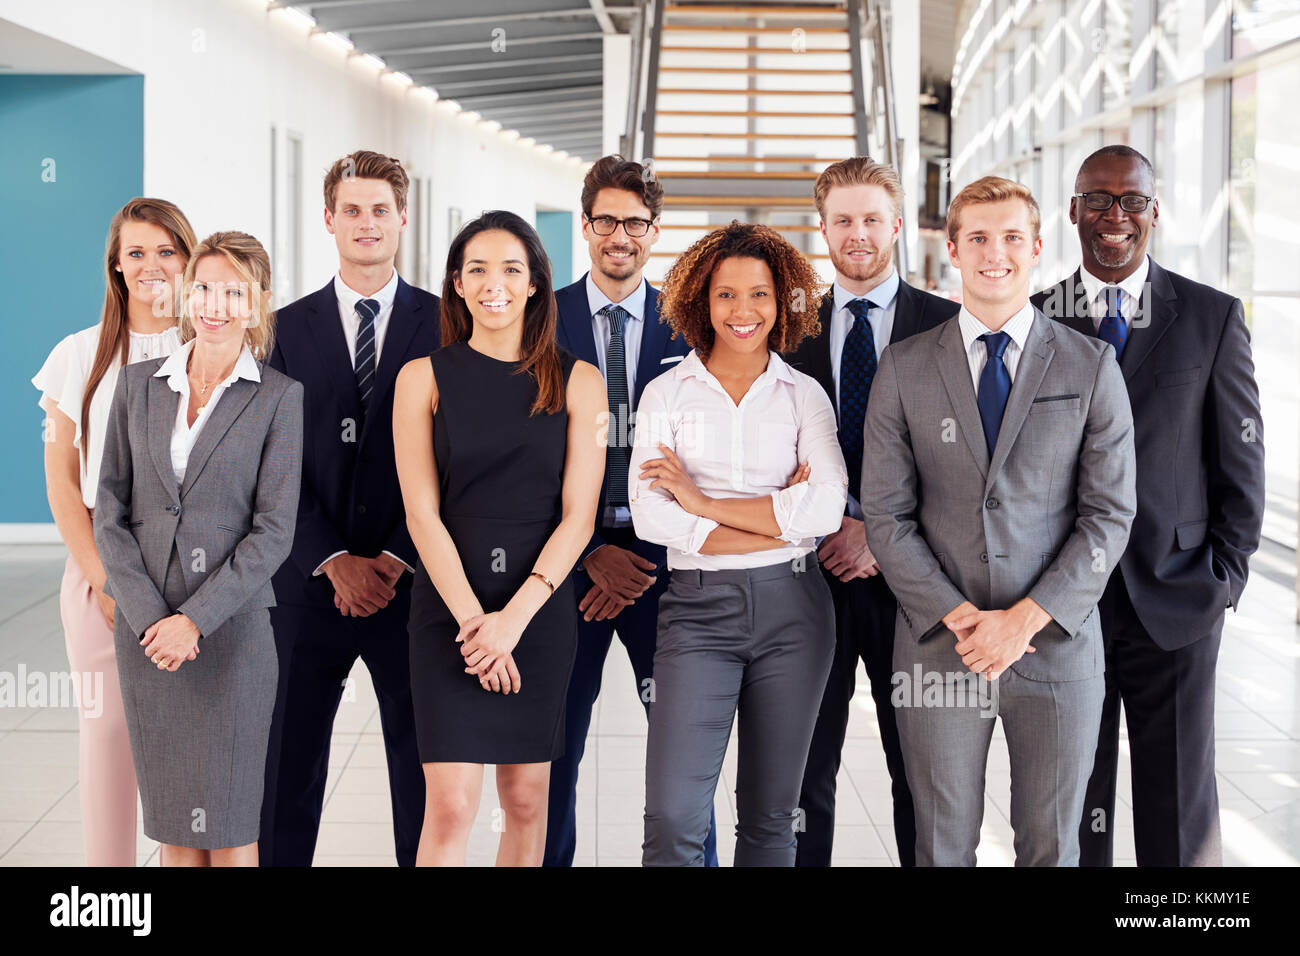 Office workers in a modern lobby, group portrait Stock Photo